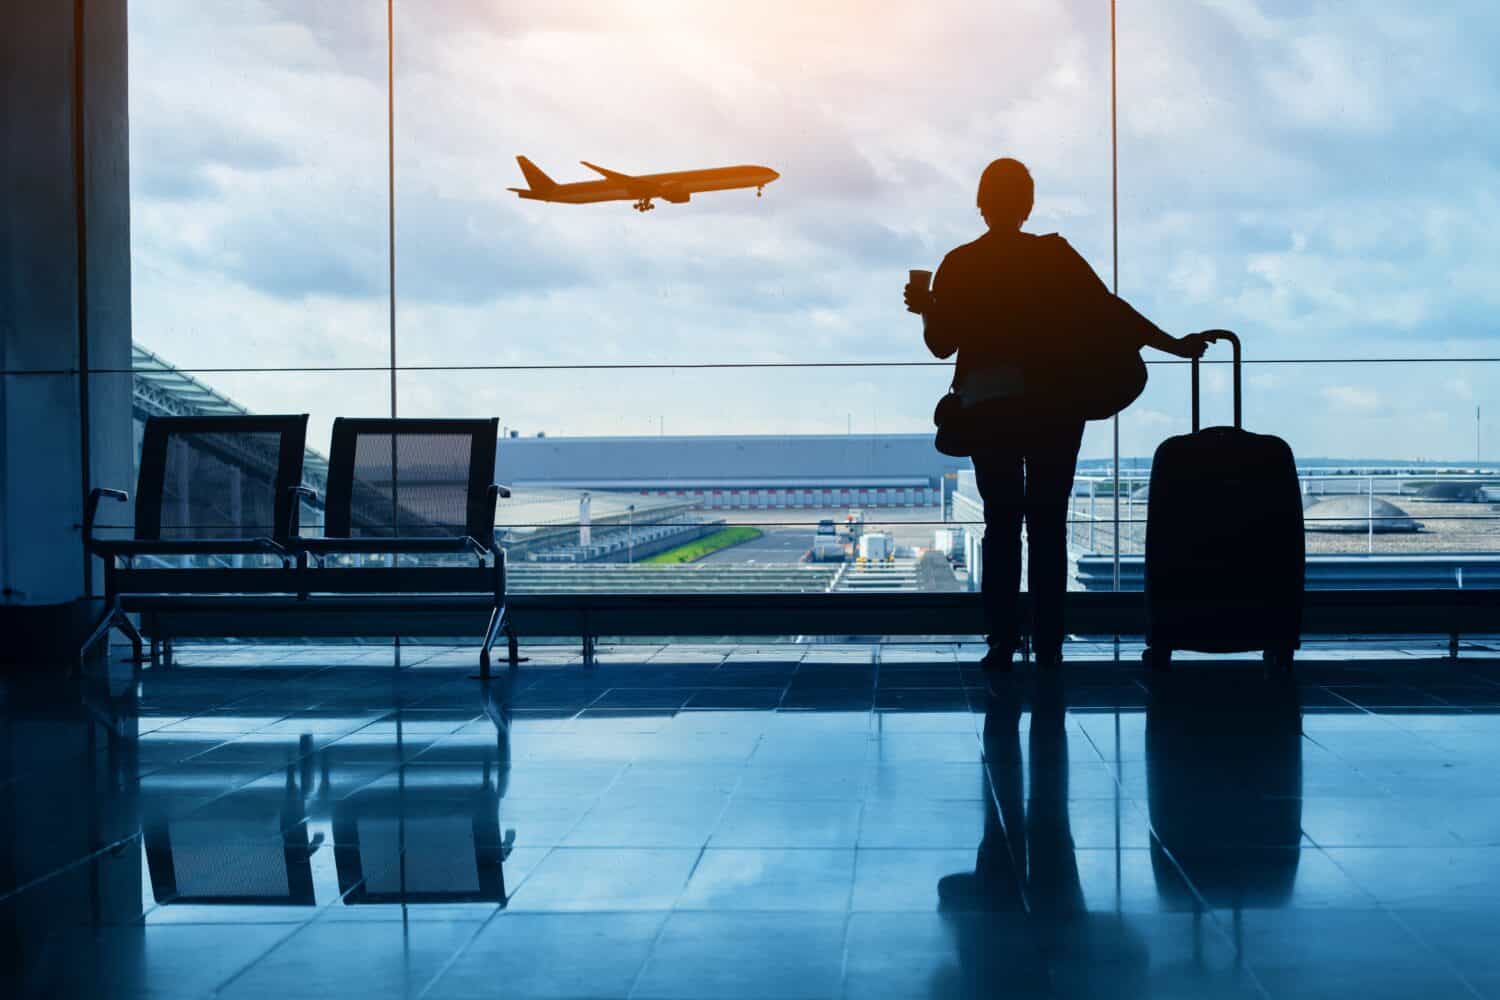 travel by plane, woman passenger waiting in airport, silhouette of passenger watching aircraft taking off